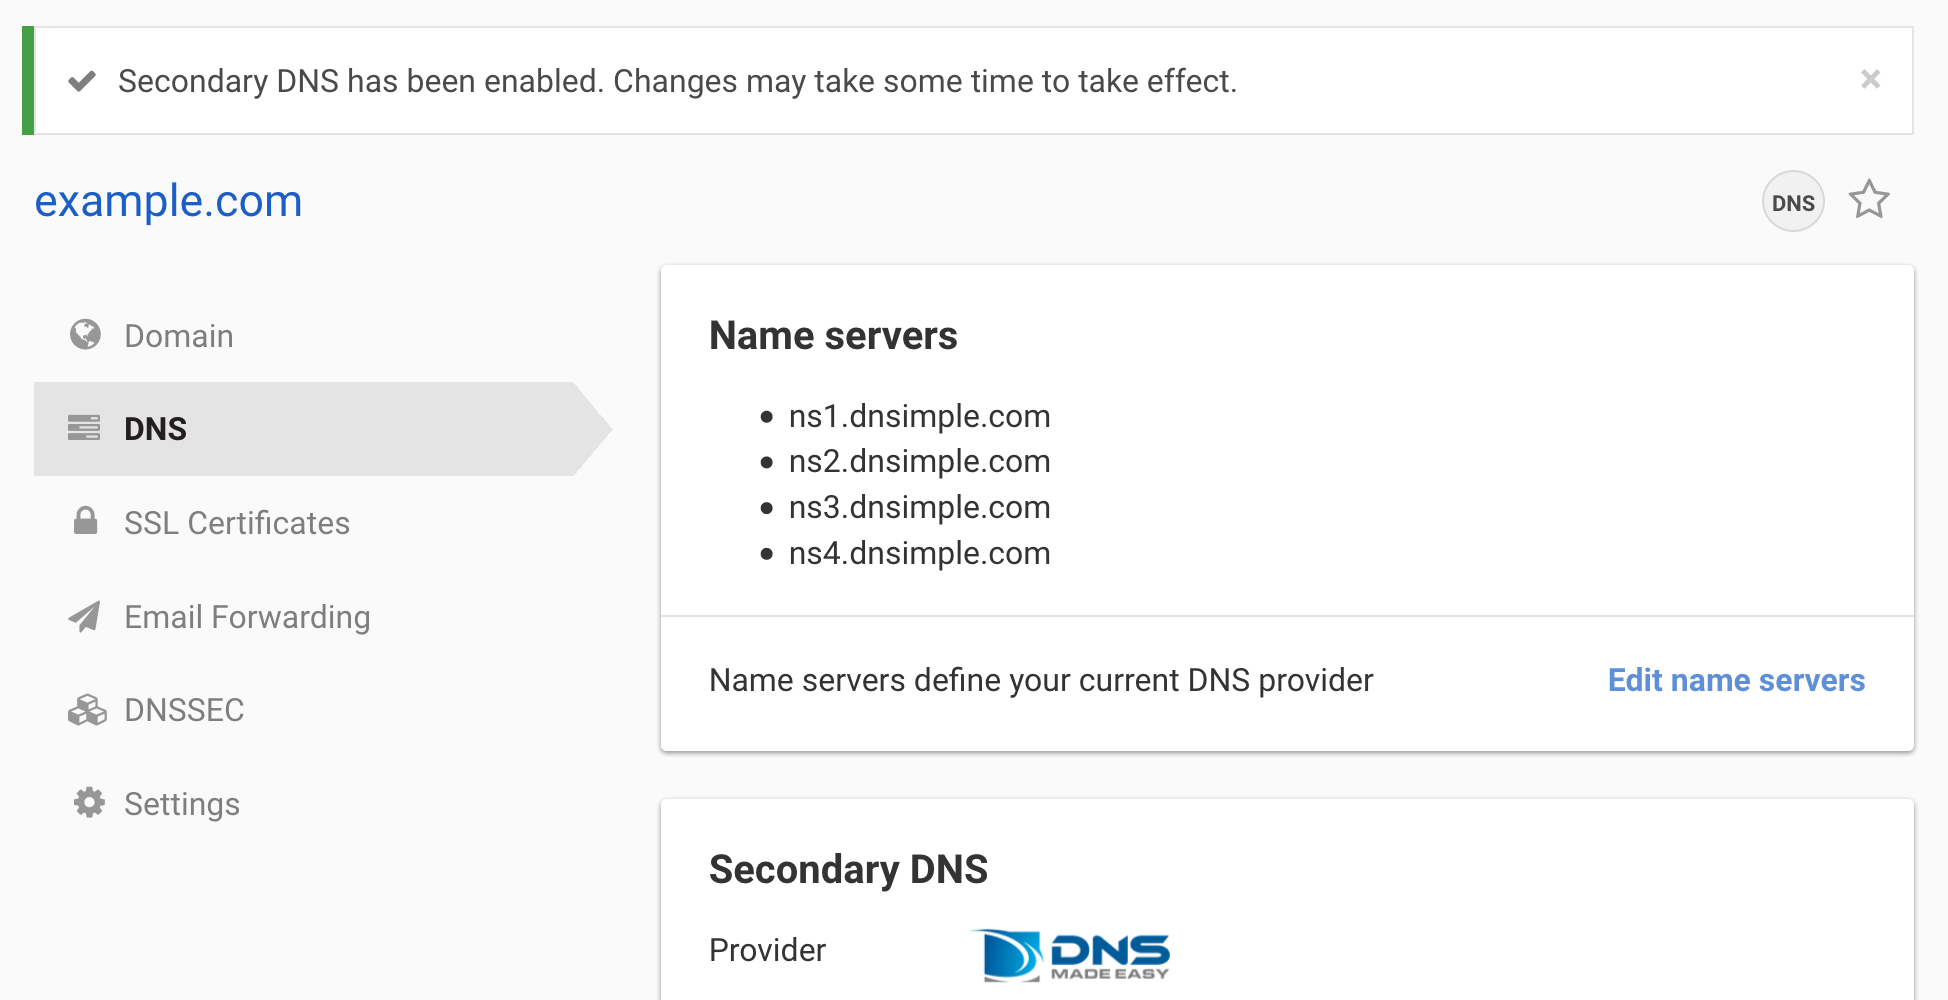 Updated DNS management page